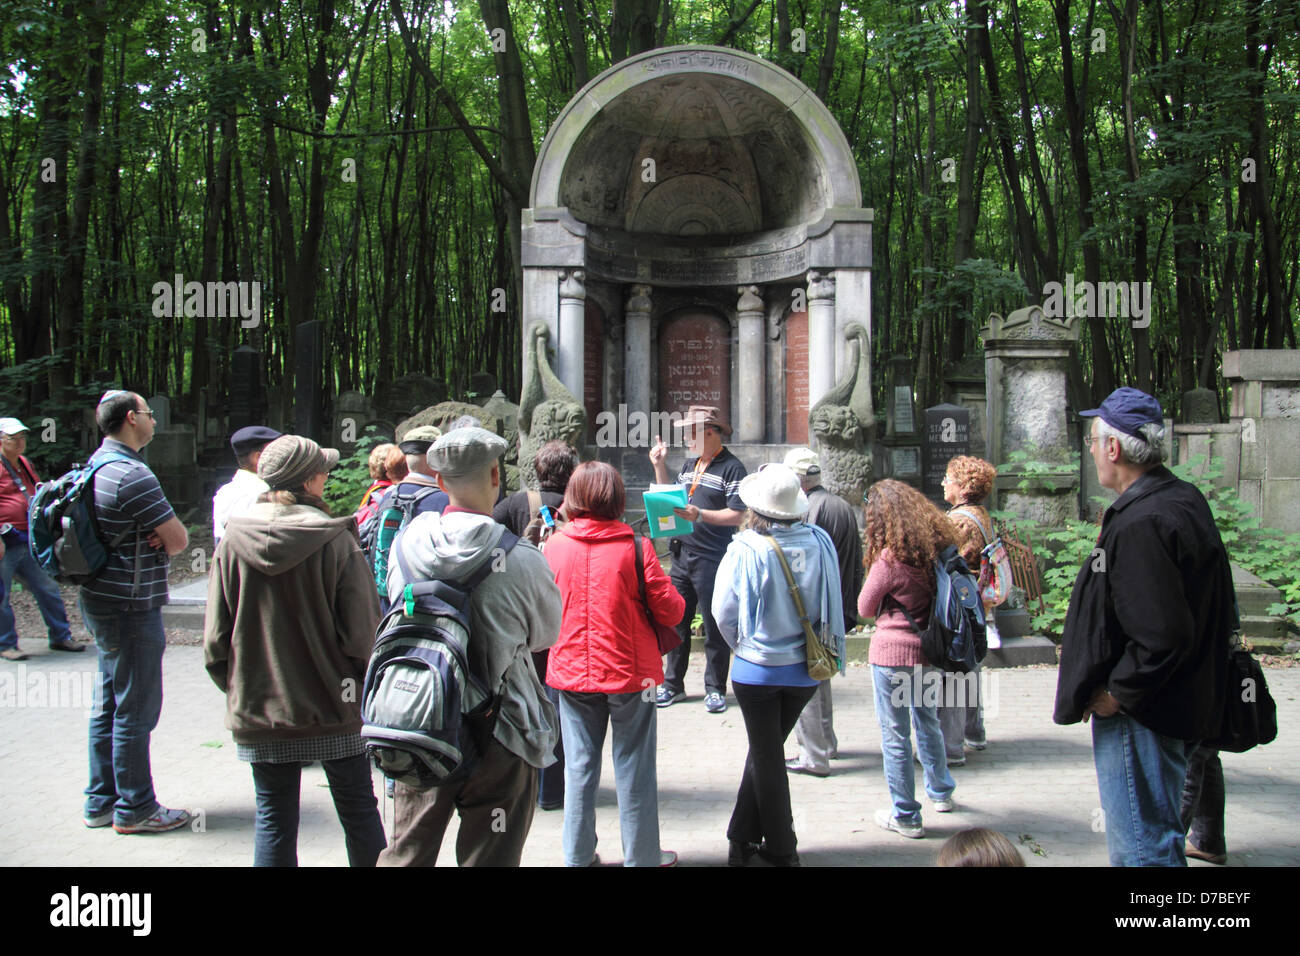 Israelis visiting the Jewish Cemetery at Okopowa Street In Warsaw, Poland Stock Photo